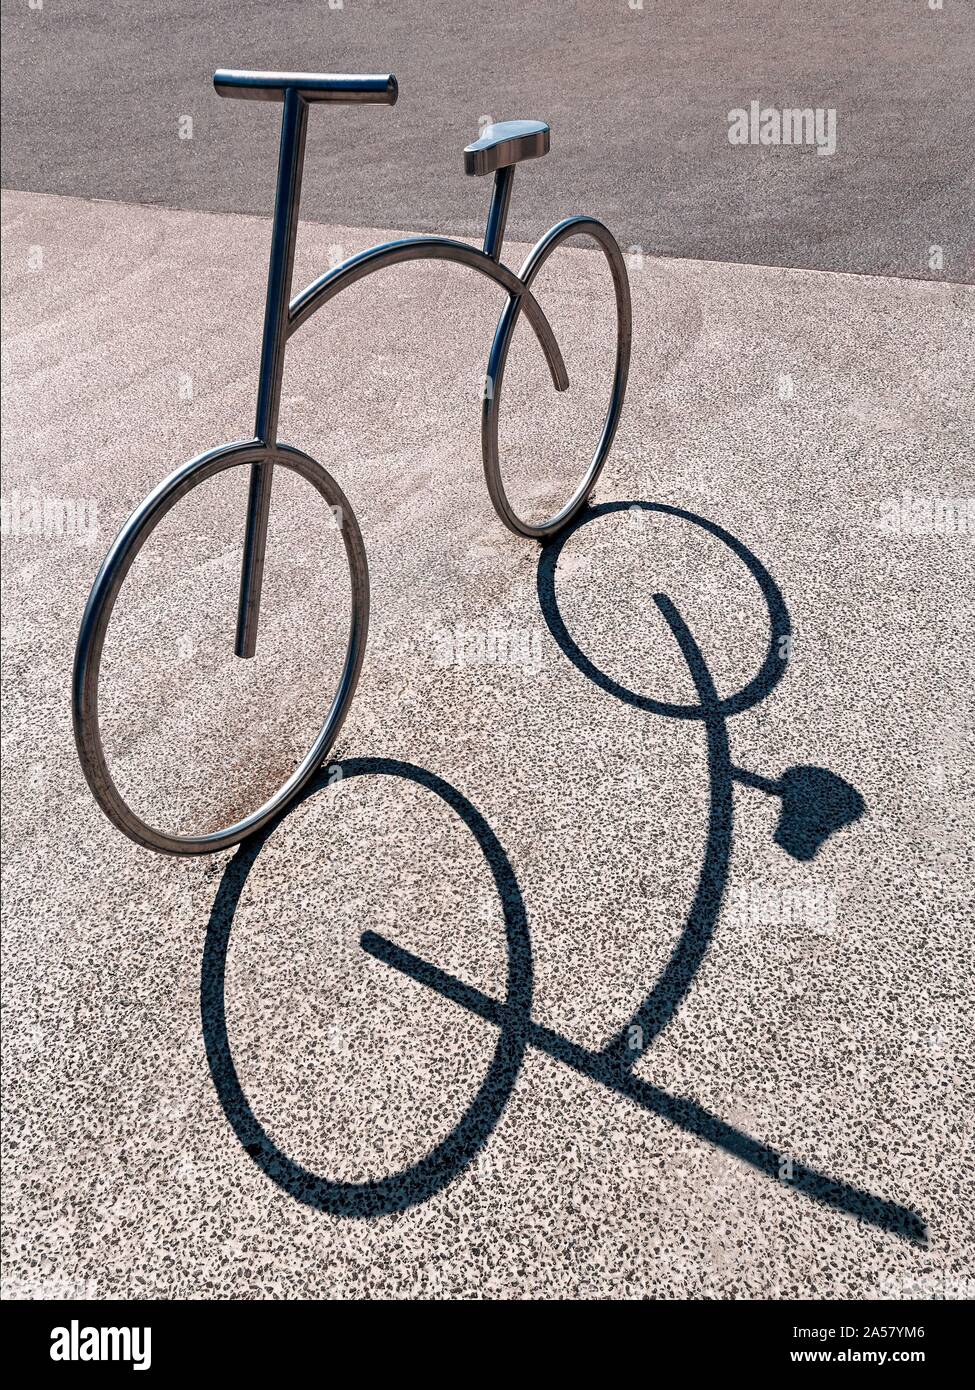 Bicycle, bicycle stand, stainless steel bicycle park, casts shadow, Aalborg, Jutland, Denmark Stock Photo